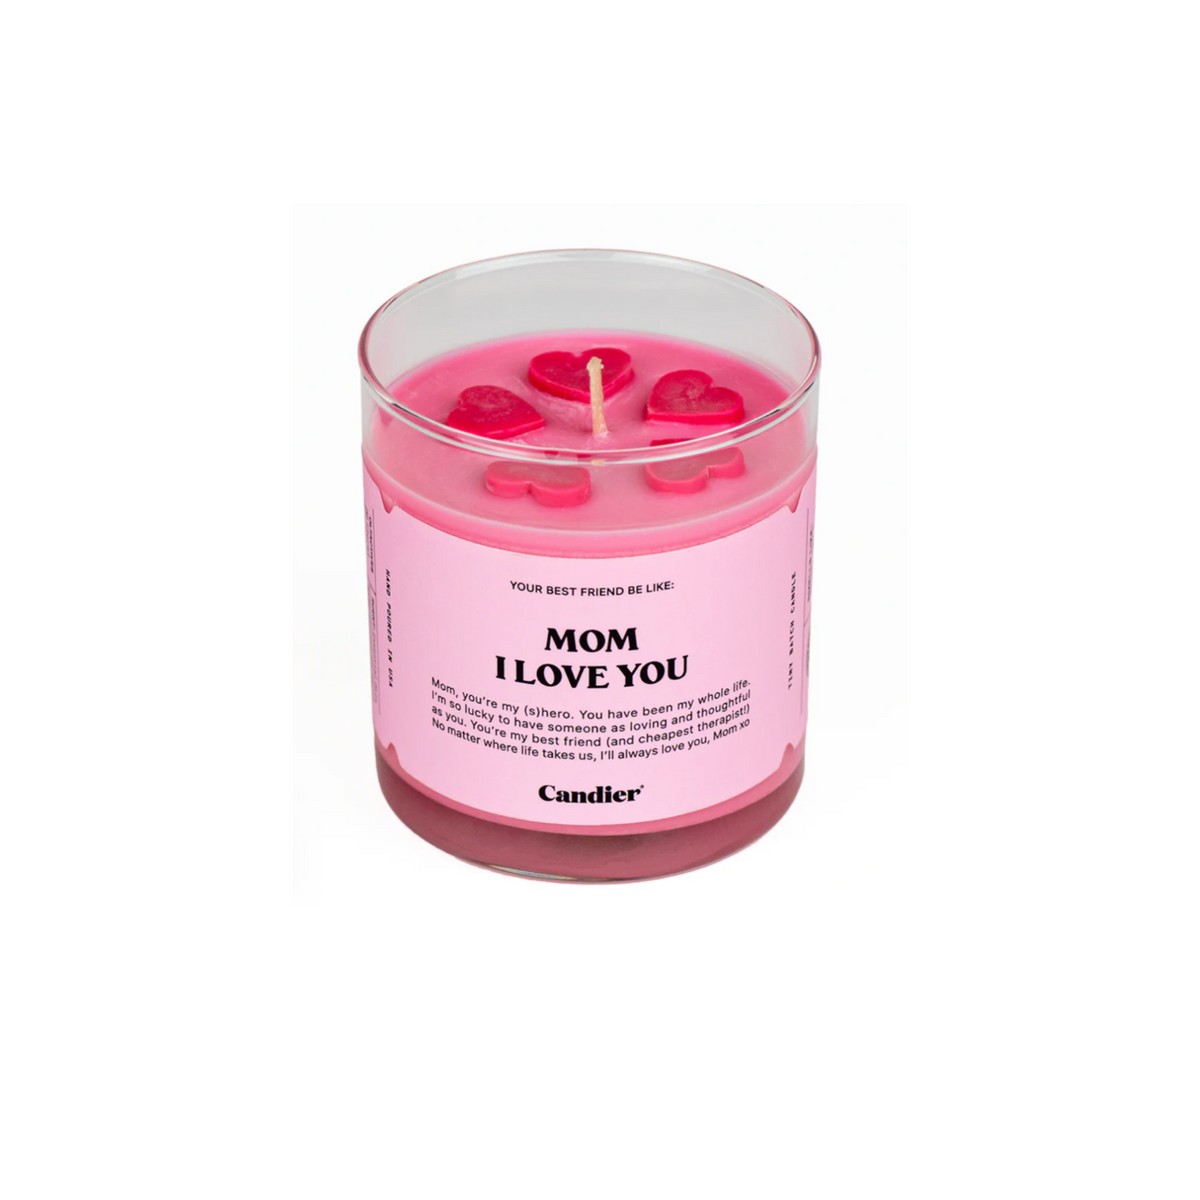 “Mom I Love You” Soy Candle